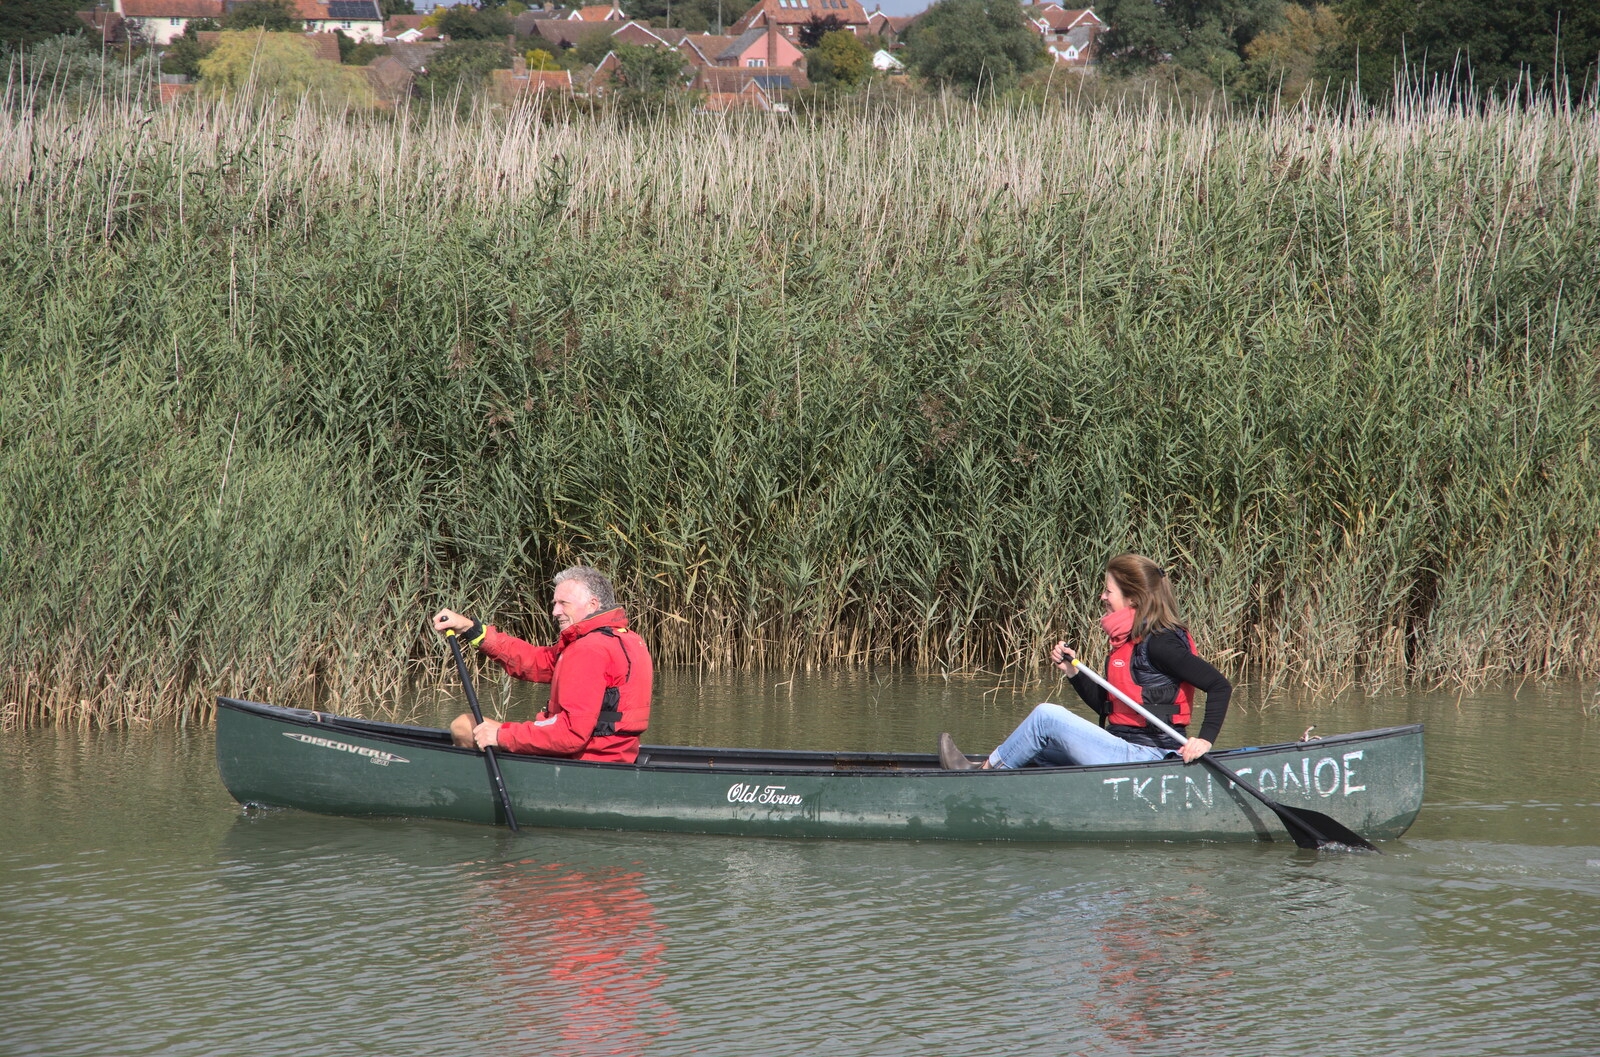 A couple canoe up the river from The Aldeburgh Food Festival, Snape Maltings, Suffolk - 25th September 2022